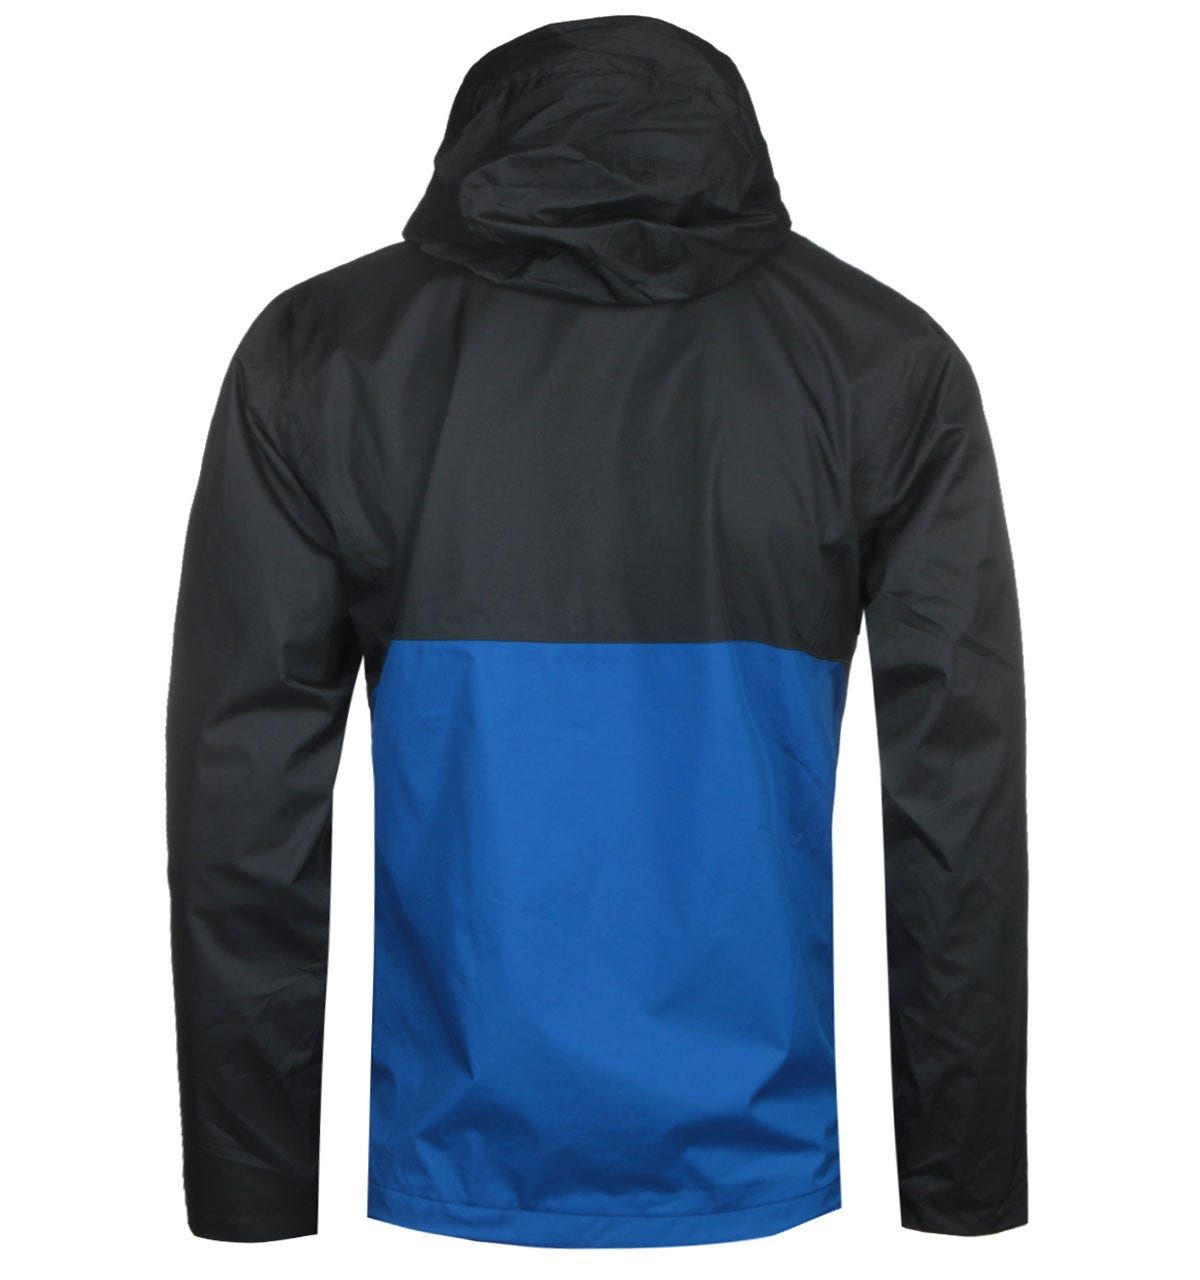 <p>The Inner Limits jacket from Columbia features a full-zip fastening, adjustable hood, zip side pockets,adjustable cuffs and drawcord adjustable hem . This jacket displays contrast colour block panels with the Columbia script logo to the chest. This jacket can also be packed away into the side pocket for ease of carrying. </p>\n\n<ul><li>Regular fit</li><li>Waterproof</li><li>Adjustable hood</li><li>Full-zip fastening</li><li>Columbia branding</li><li>Interior security pocket</li></ul>